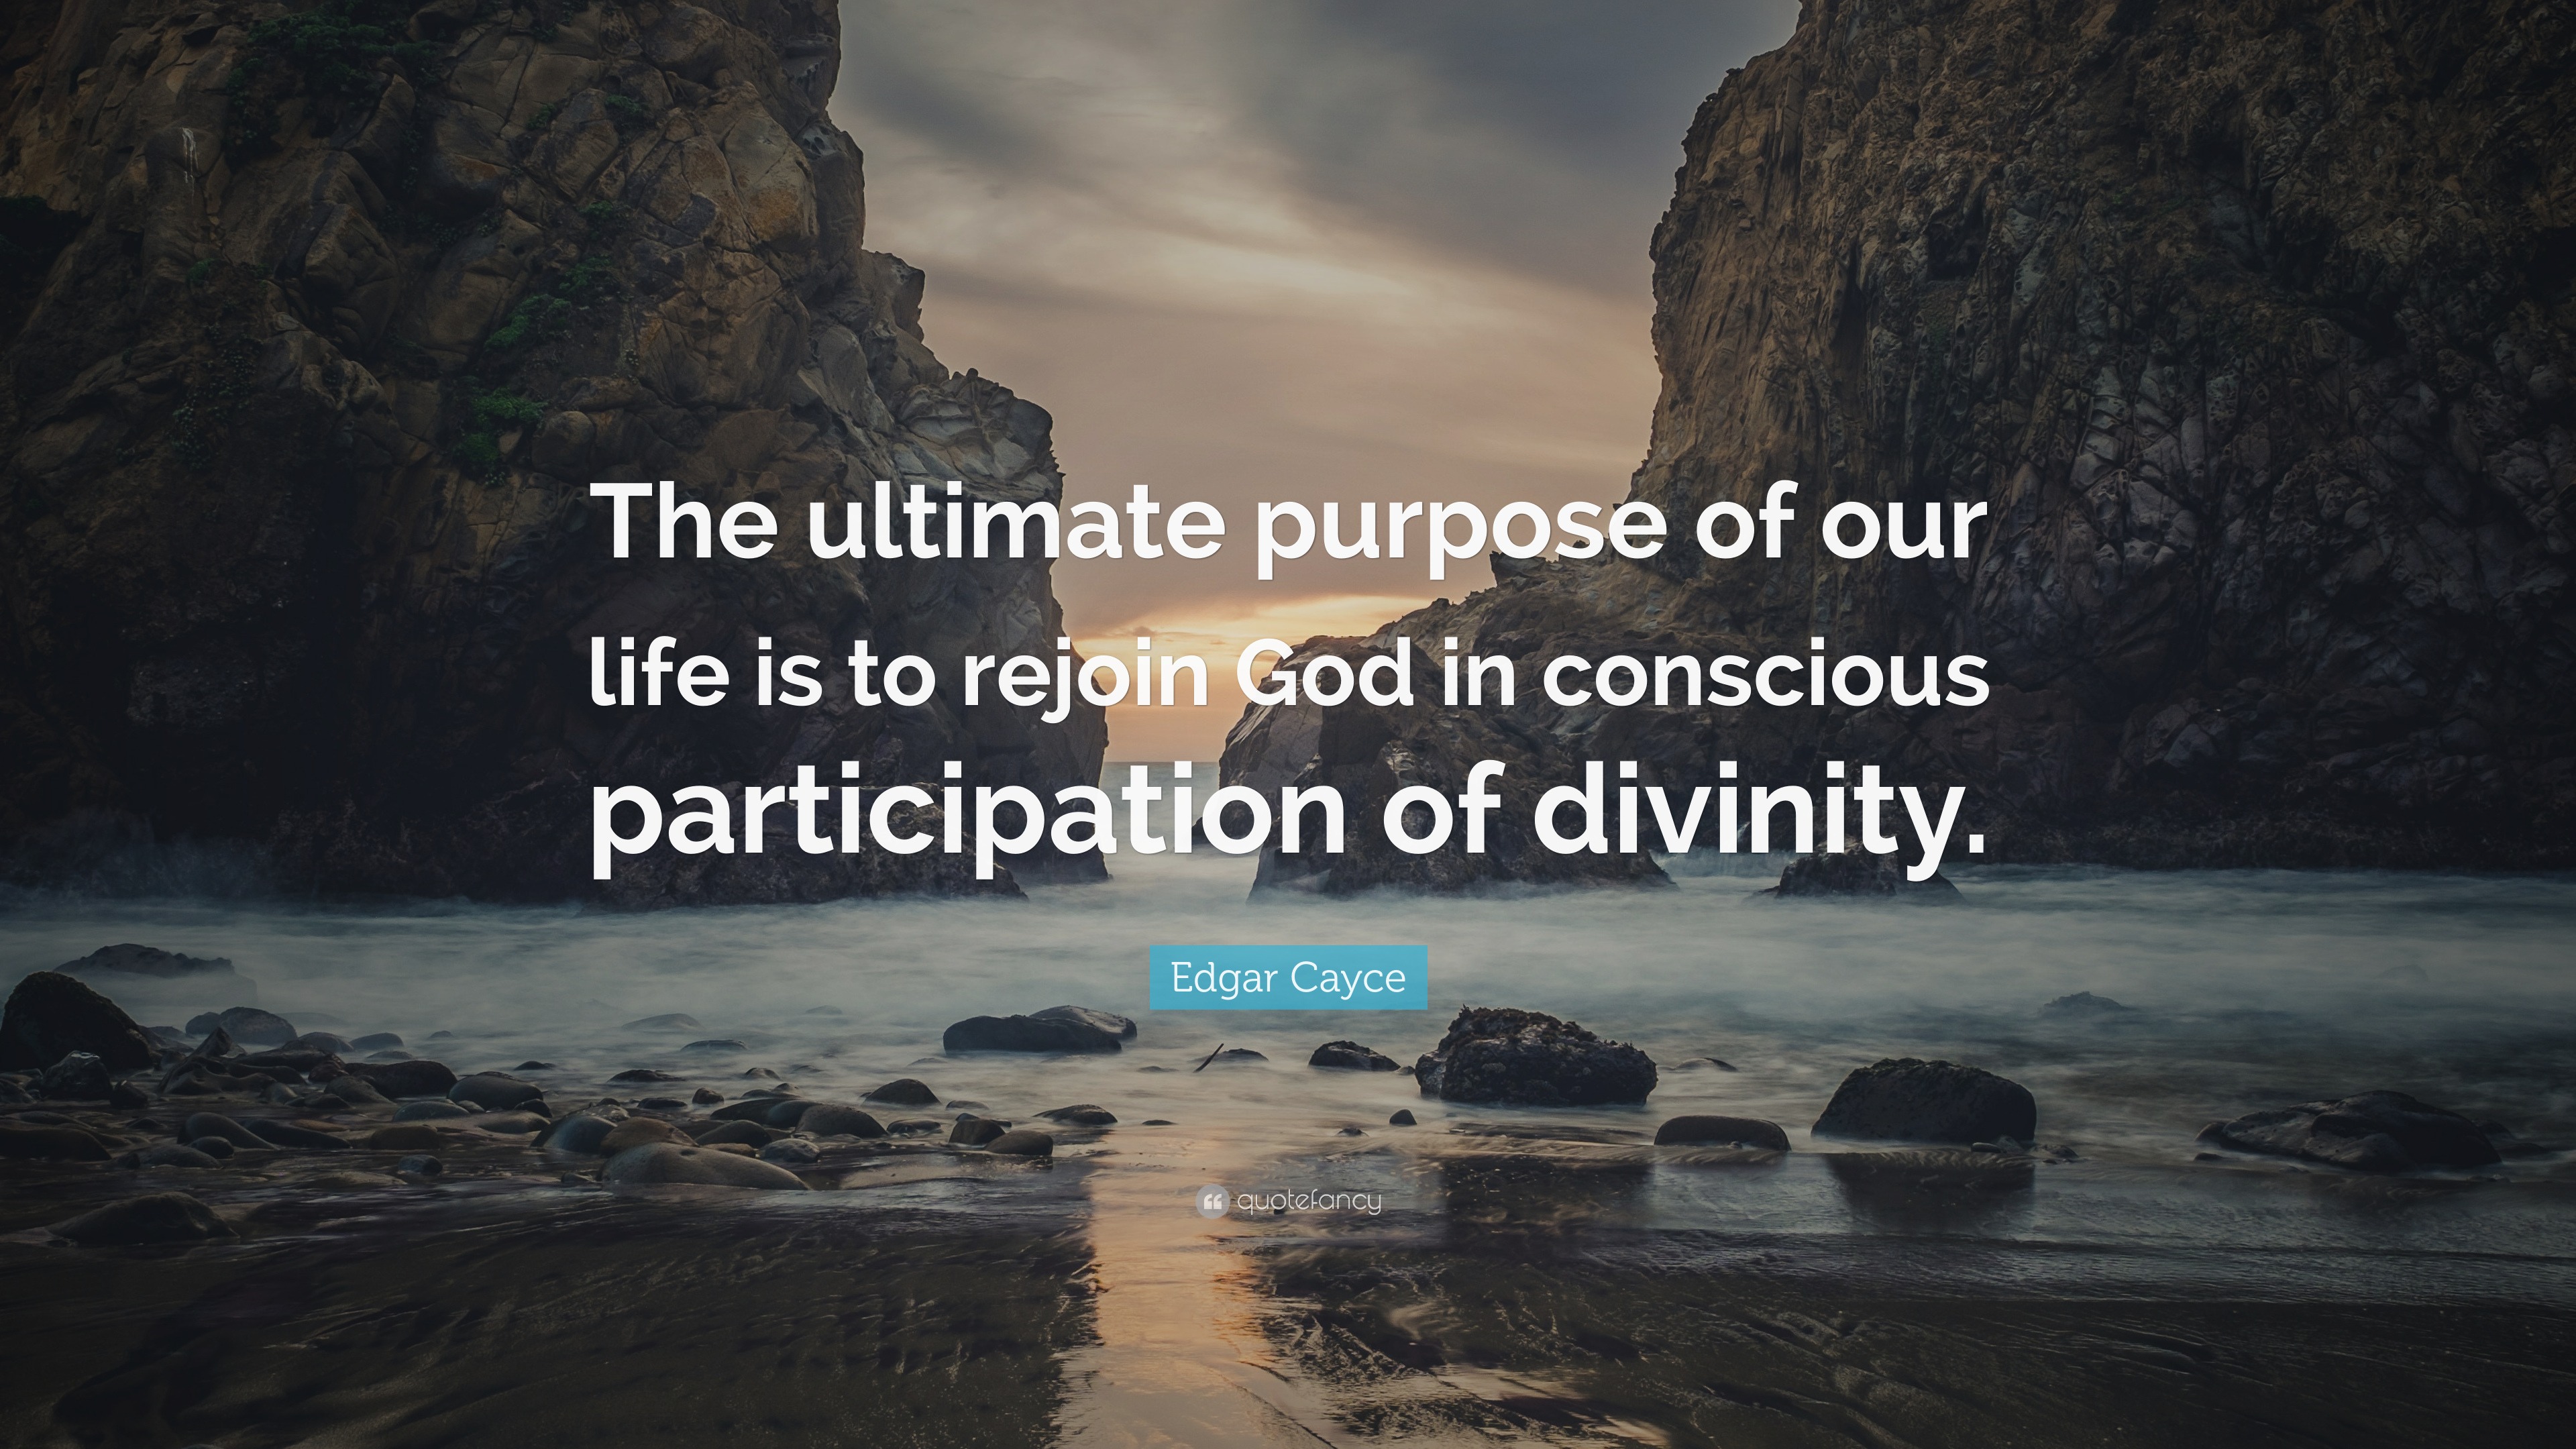 Edgar Cayce Quote: “The ultimate purpose of our life is to rejoin God